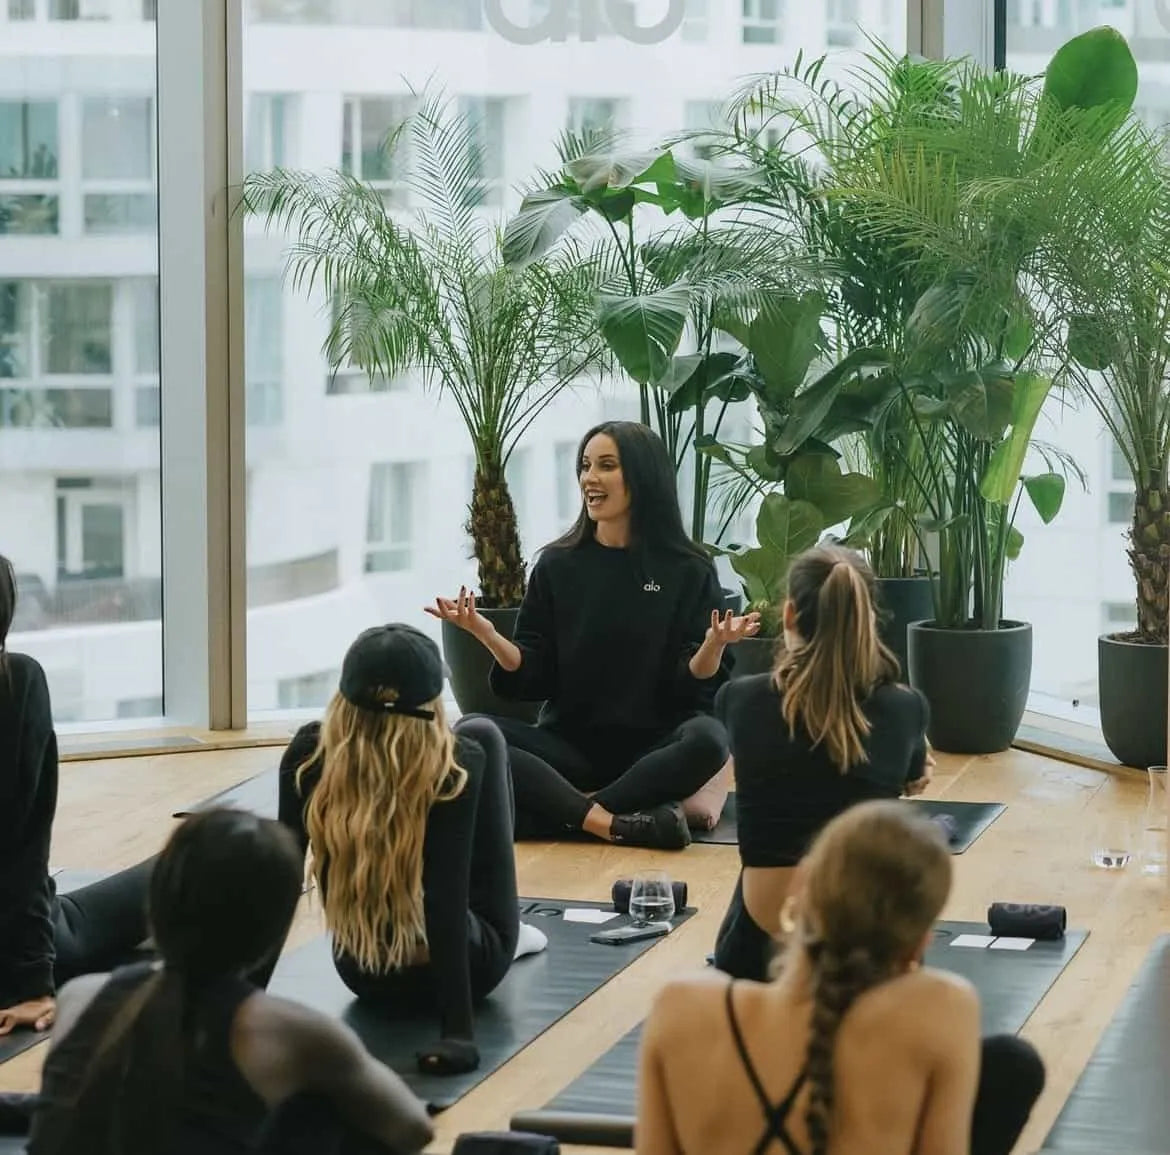 A Yoga class in a well-lit, spacious room with floor-to-ceiling windows. A selection of large, potted plants in the background fills the space with a sense of calm and a connection to nature. Plant rental services by Amaranté London are designed to enhance the wellness experience for corporate or business clients.